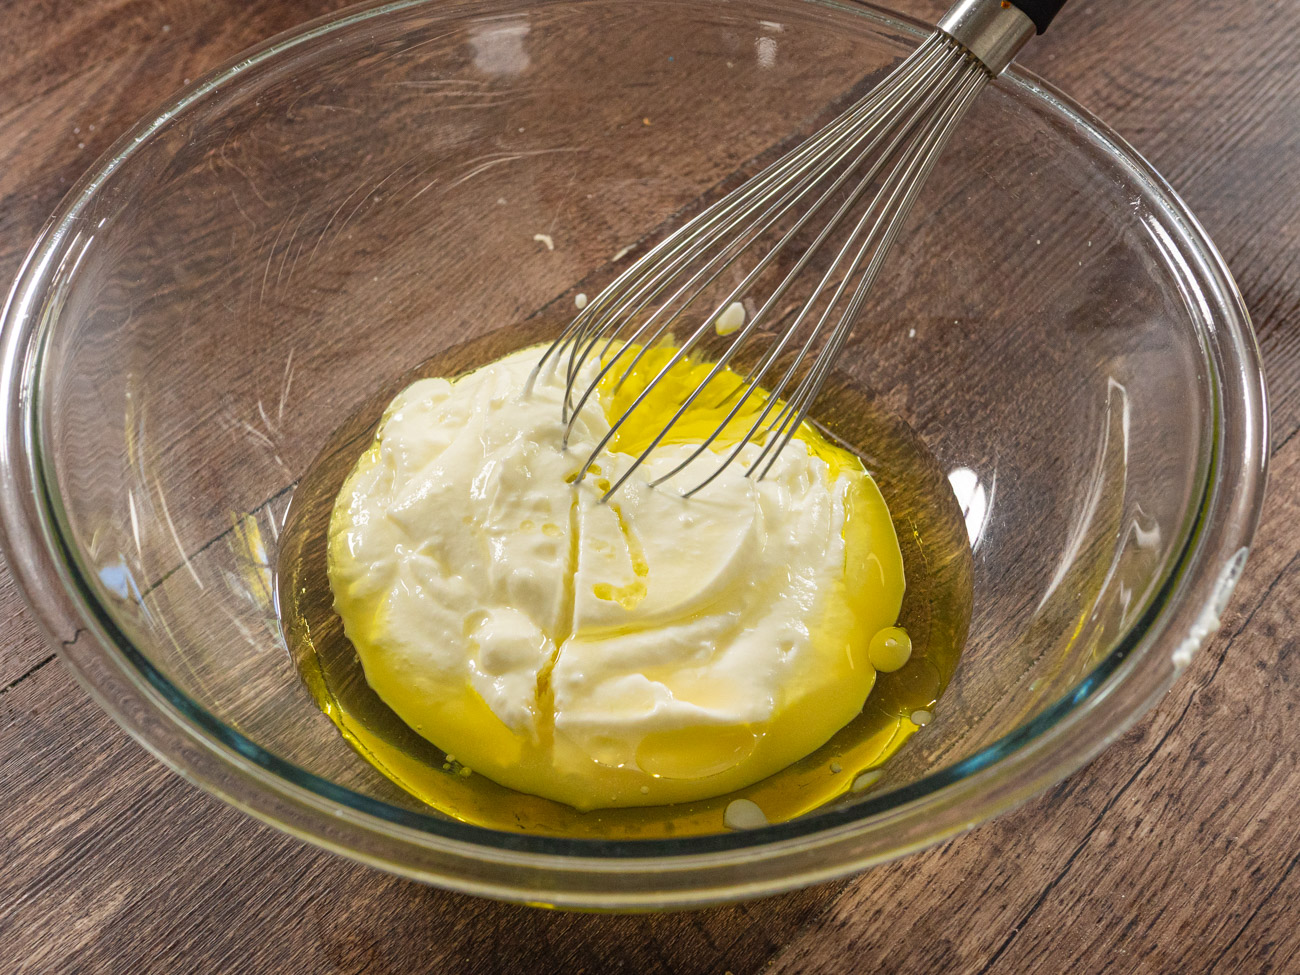 Whisk together yogurt, olive oil, and lemon juice together in large bowl. Add jalapeño pepper, green onion, and bread and stir to coat all pieces. Let stand for 10 minutes.